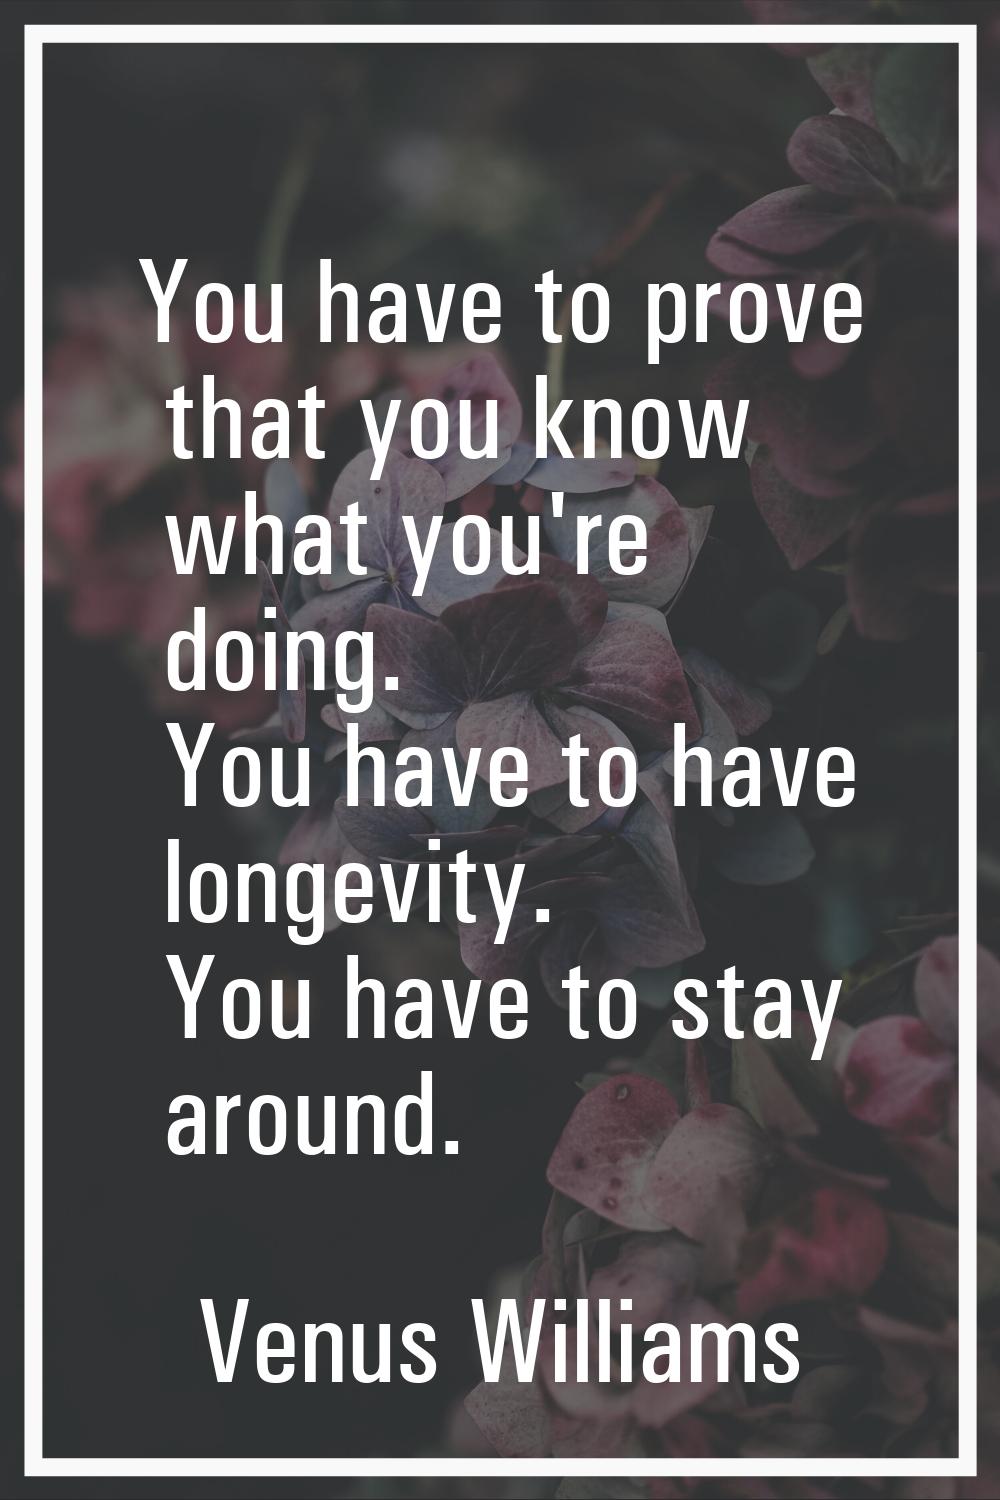 You have to prove that you know what you're doing. You have to have longevity. You have to stay aro